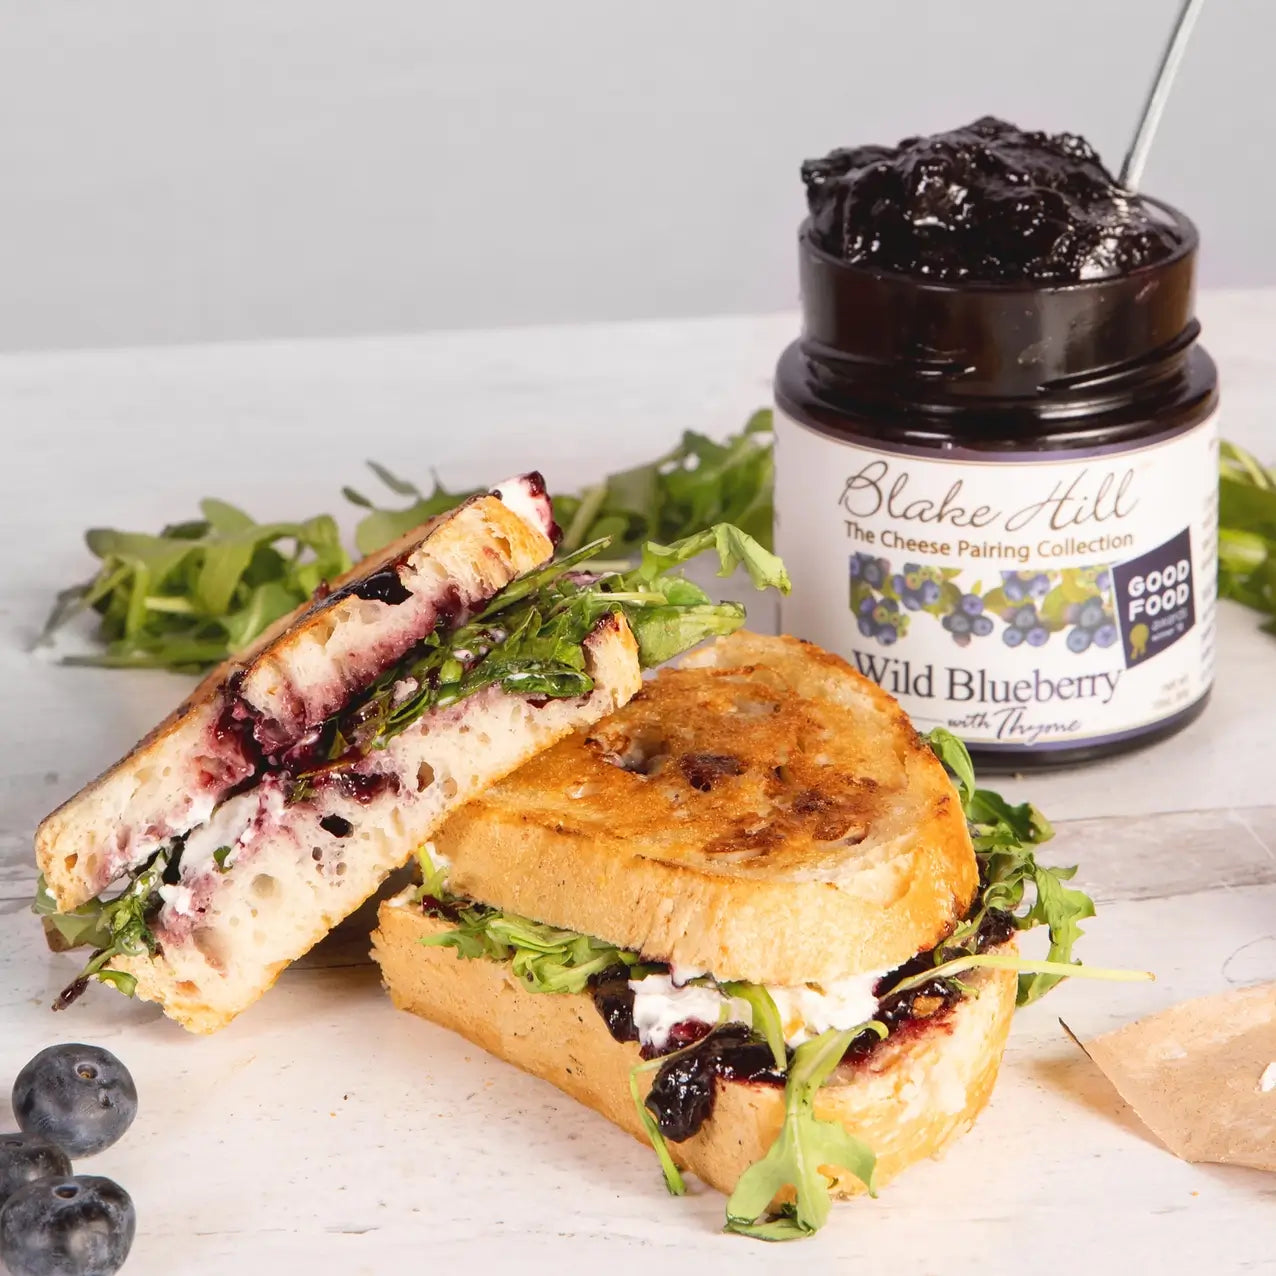 Sandwich made with  Blake Hill Preserves Wild Blueberry with Thyme.